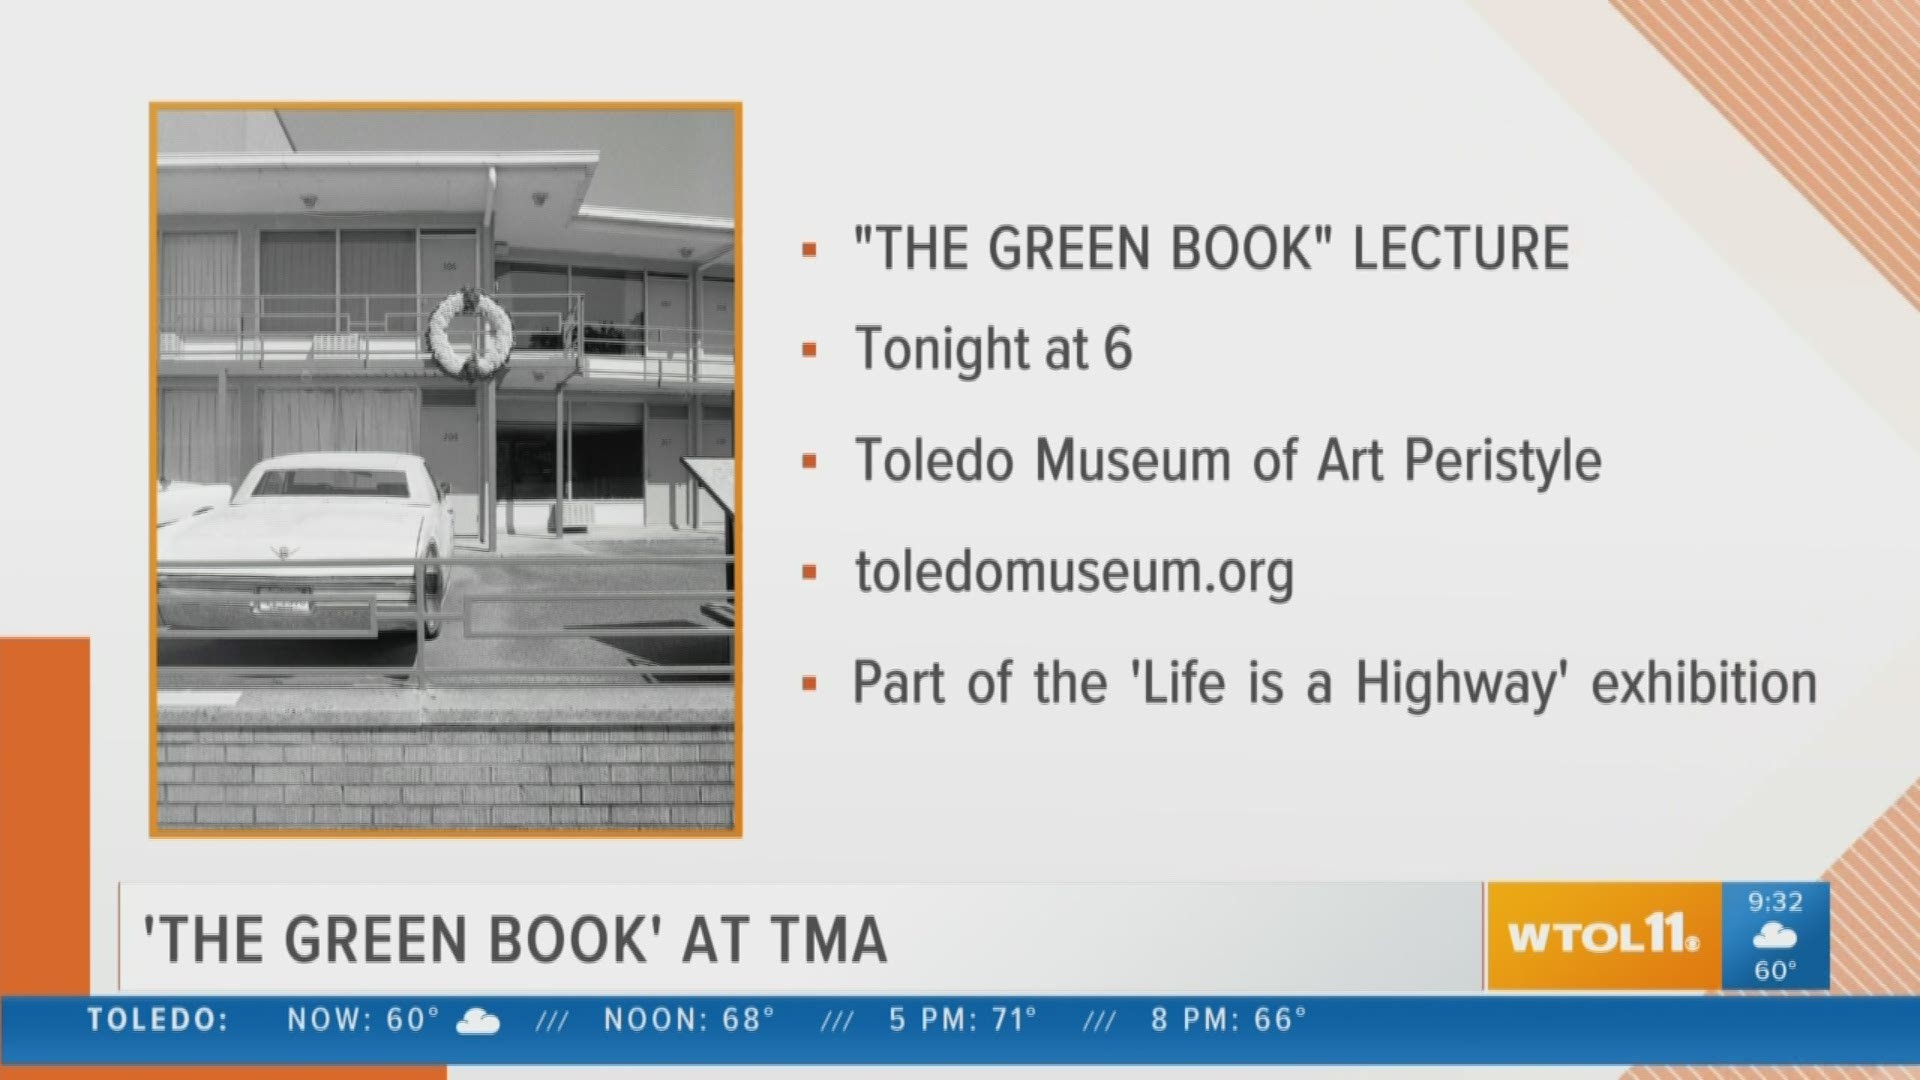 Right now, we think of it as "Triple A" — a guide of what to do and where to stay. But, in the days of segregation, some stops weren't as friendly as others to the African American community — that's where 'The Green Book' came in.